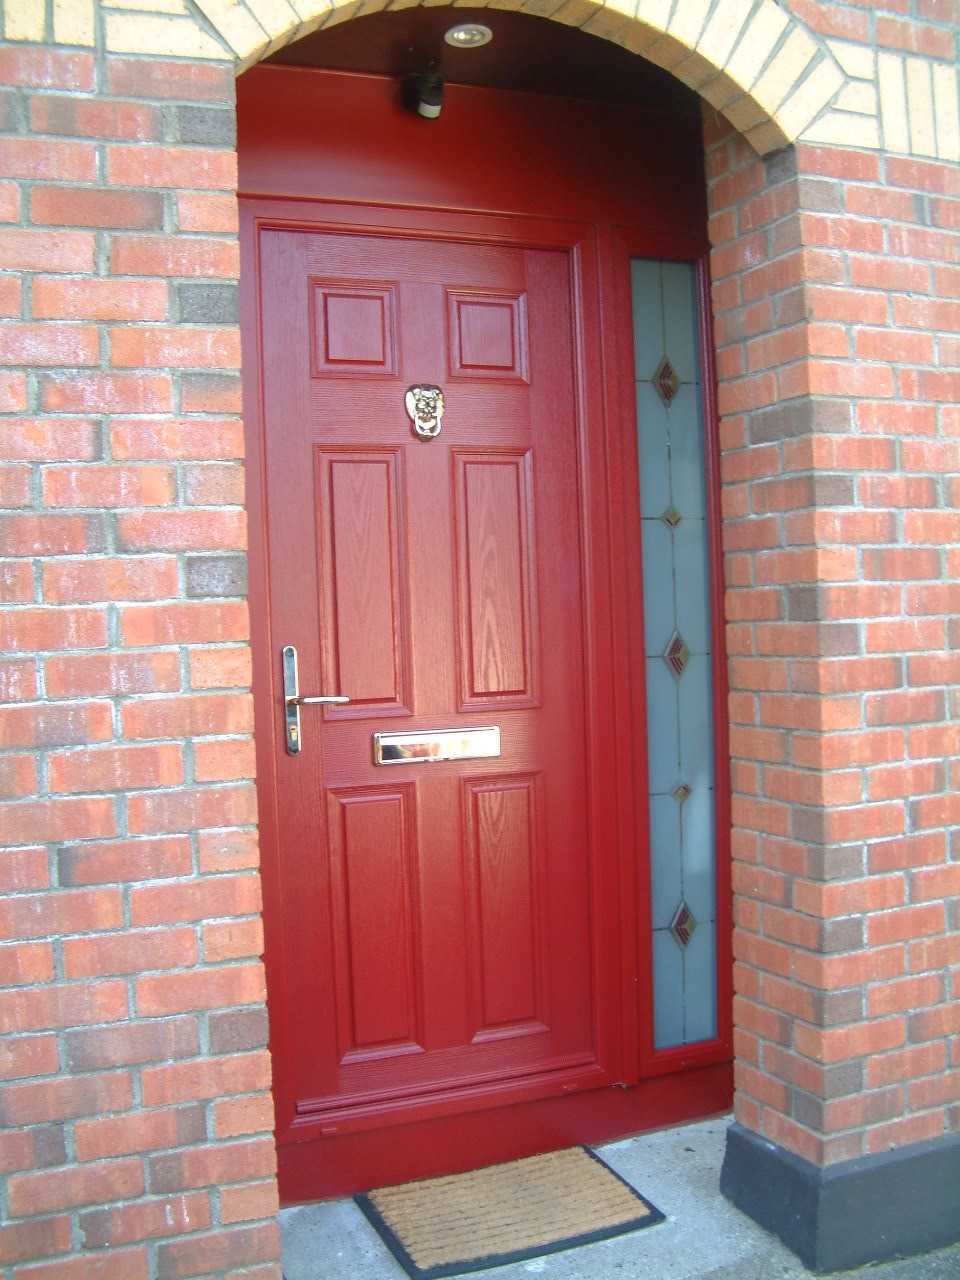 RED APEER APA1 FITTED BY ASGARD WINDOWS IN GREYSTONES.